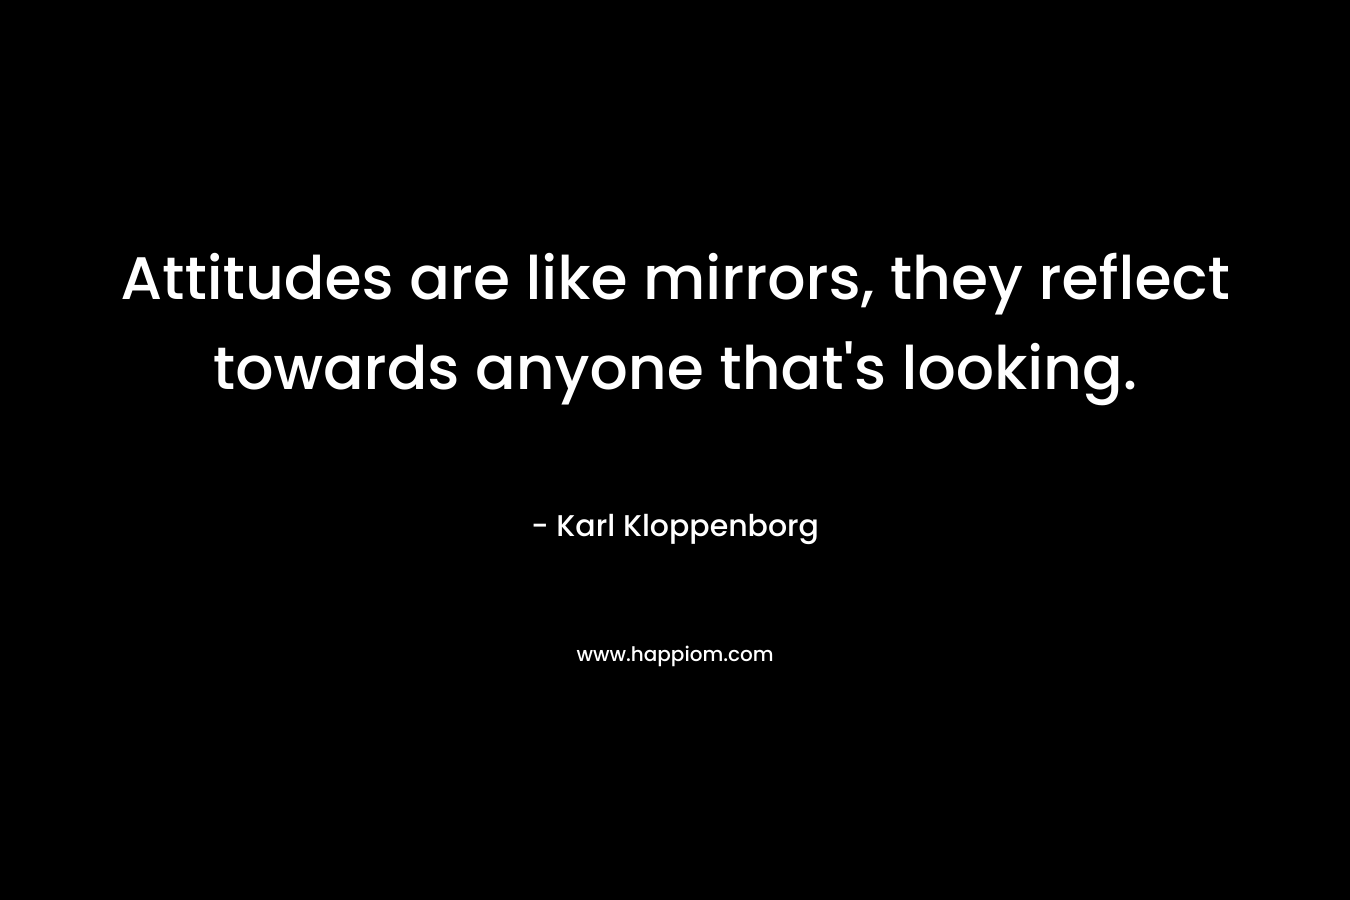 Attitudes are like mirrors, they reflect towards anyone that’s looking. – Karl Kloppenborg